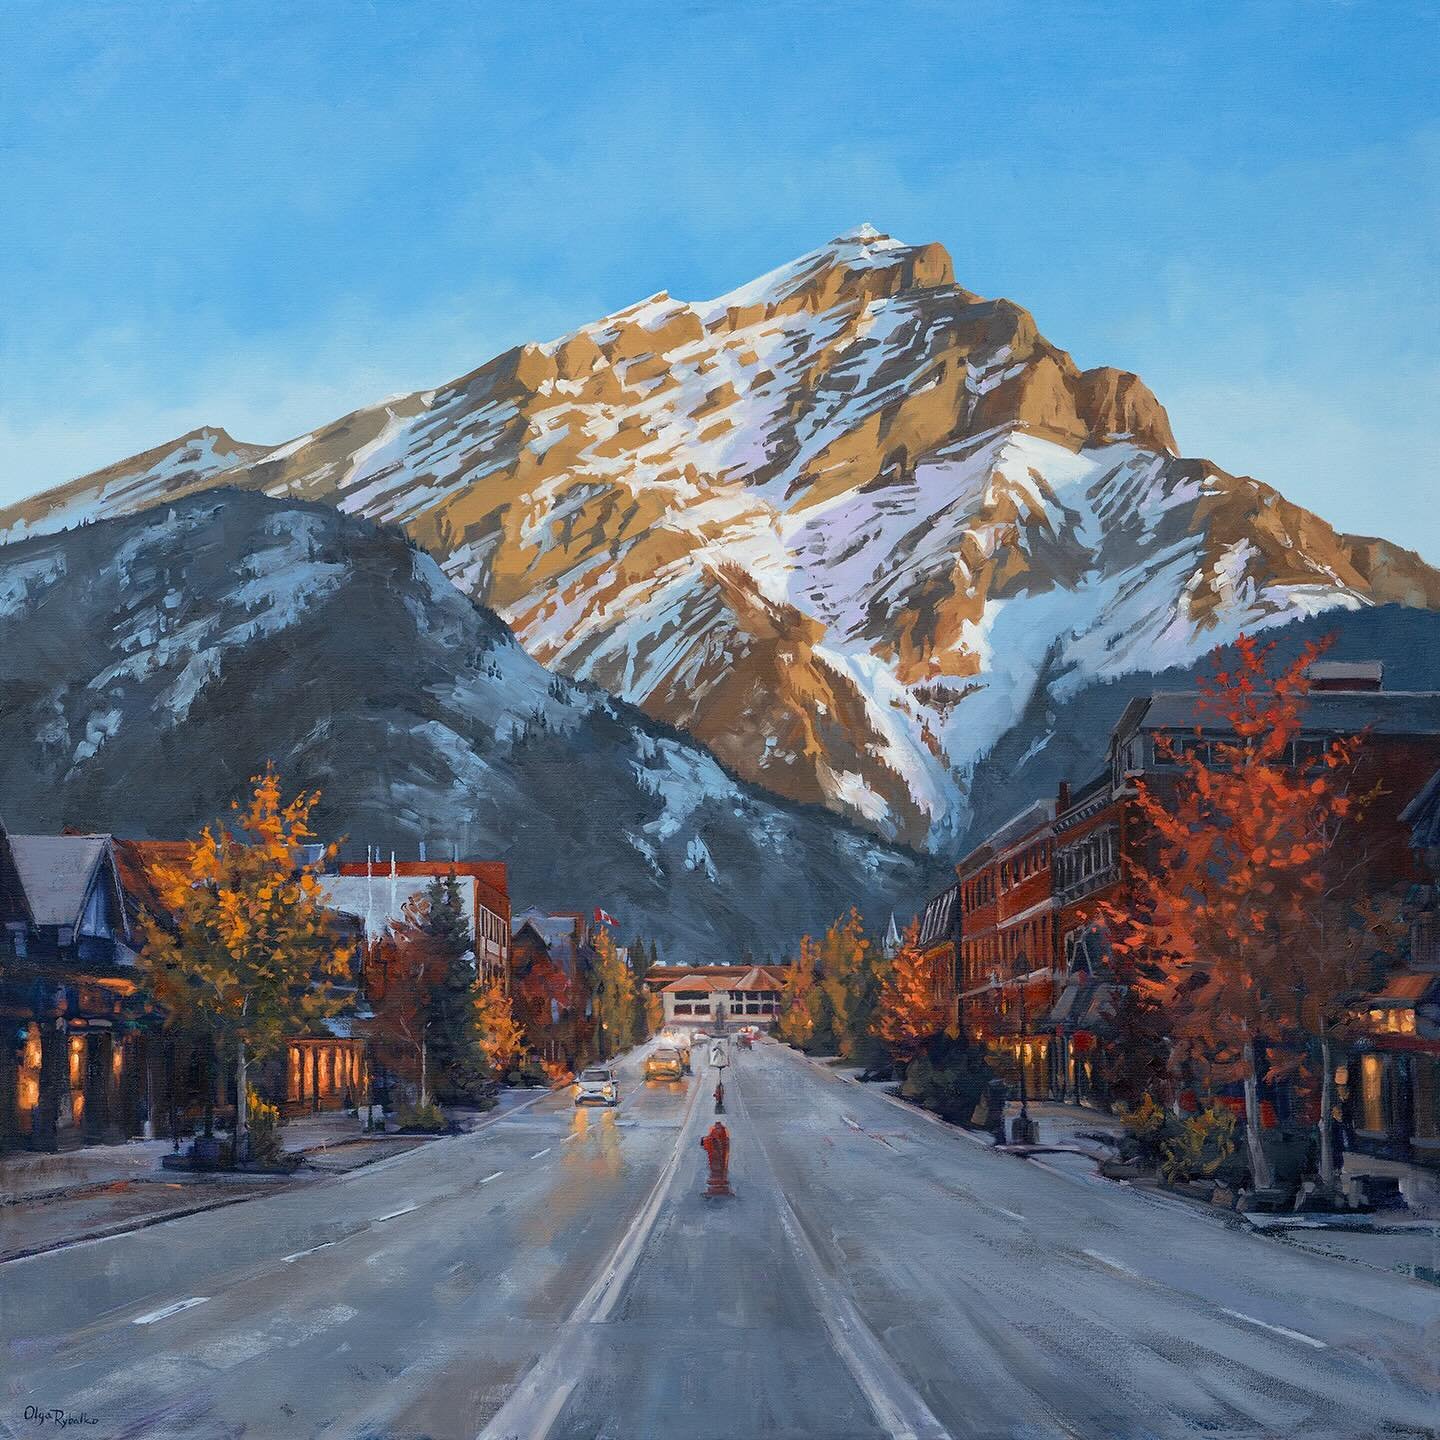 Here&rsquo;s a closer look at this painting of the main drag in Banff with Cascade Mountain as the backdrop. 
The town of Banff is undeniably picturesque, and I hope I did justice to this scene. 
&ldquo;Glow Over Banff&rdquo;, 40&rdquo;x40&rdquo;, oi